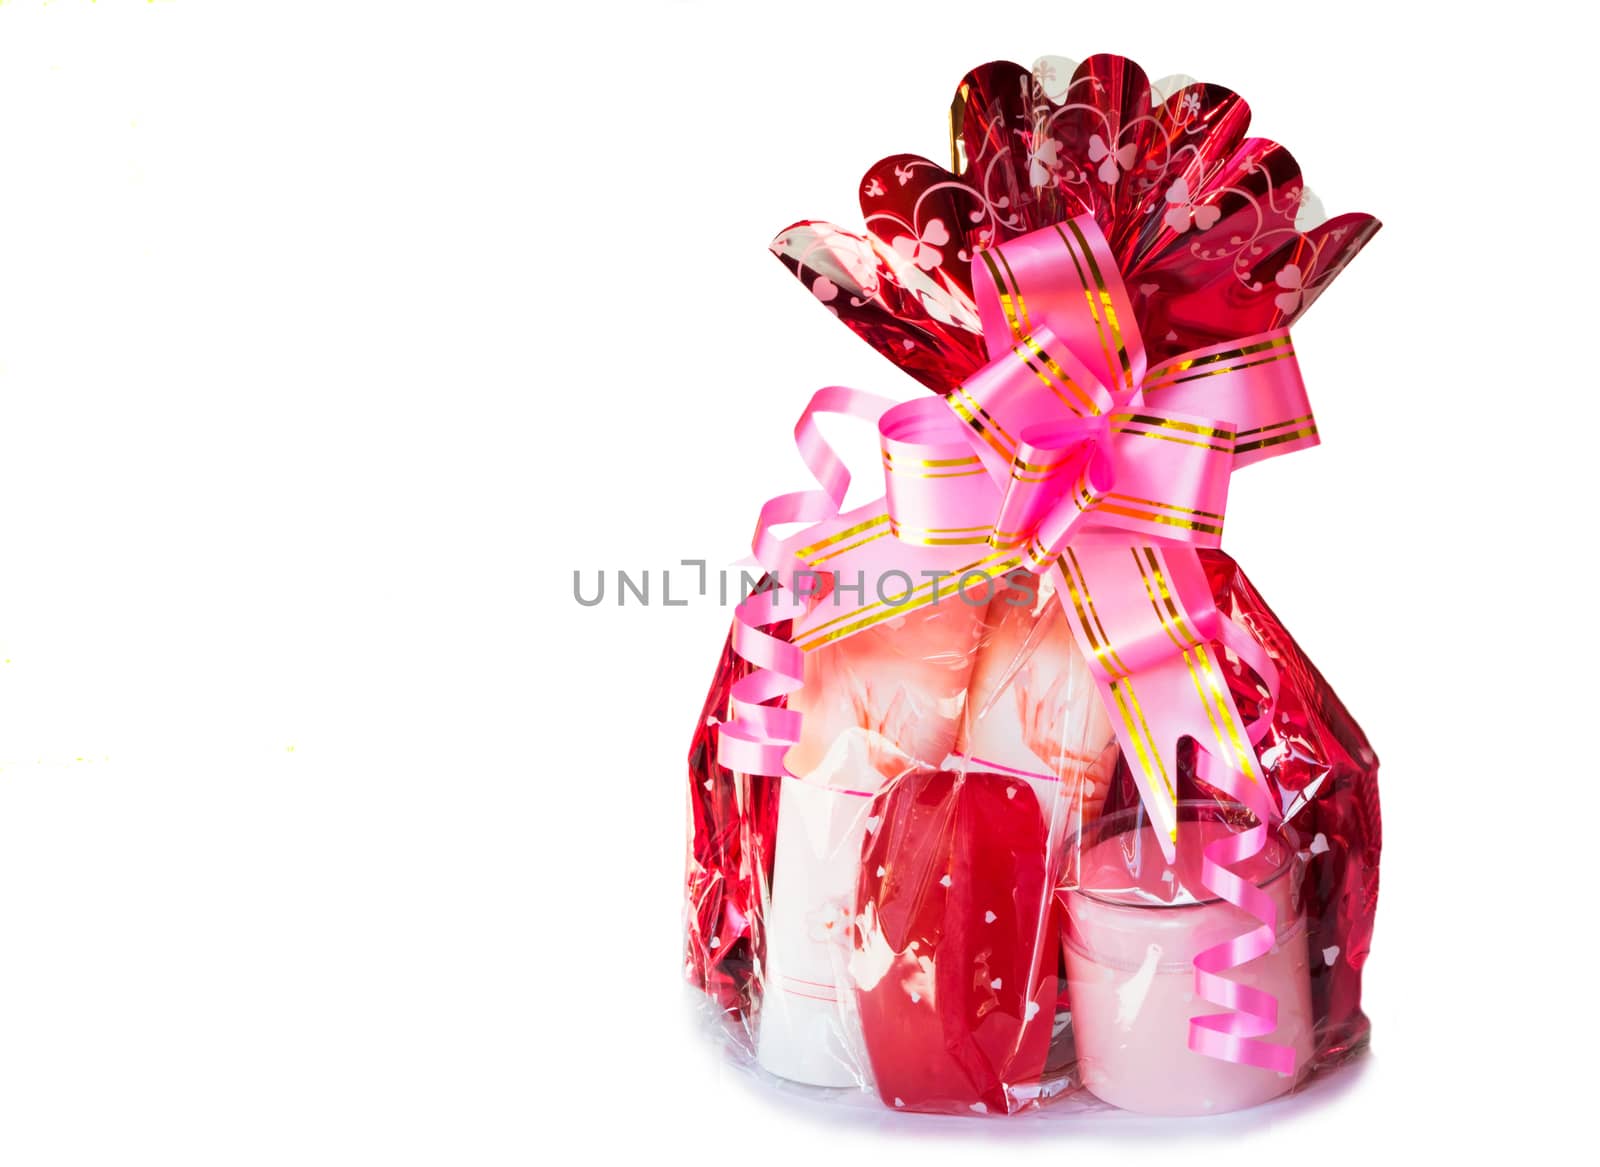 Gift - beautifully packed cosmetics. It is presented on a white background.